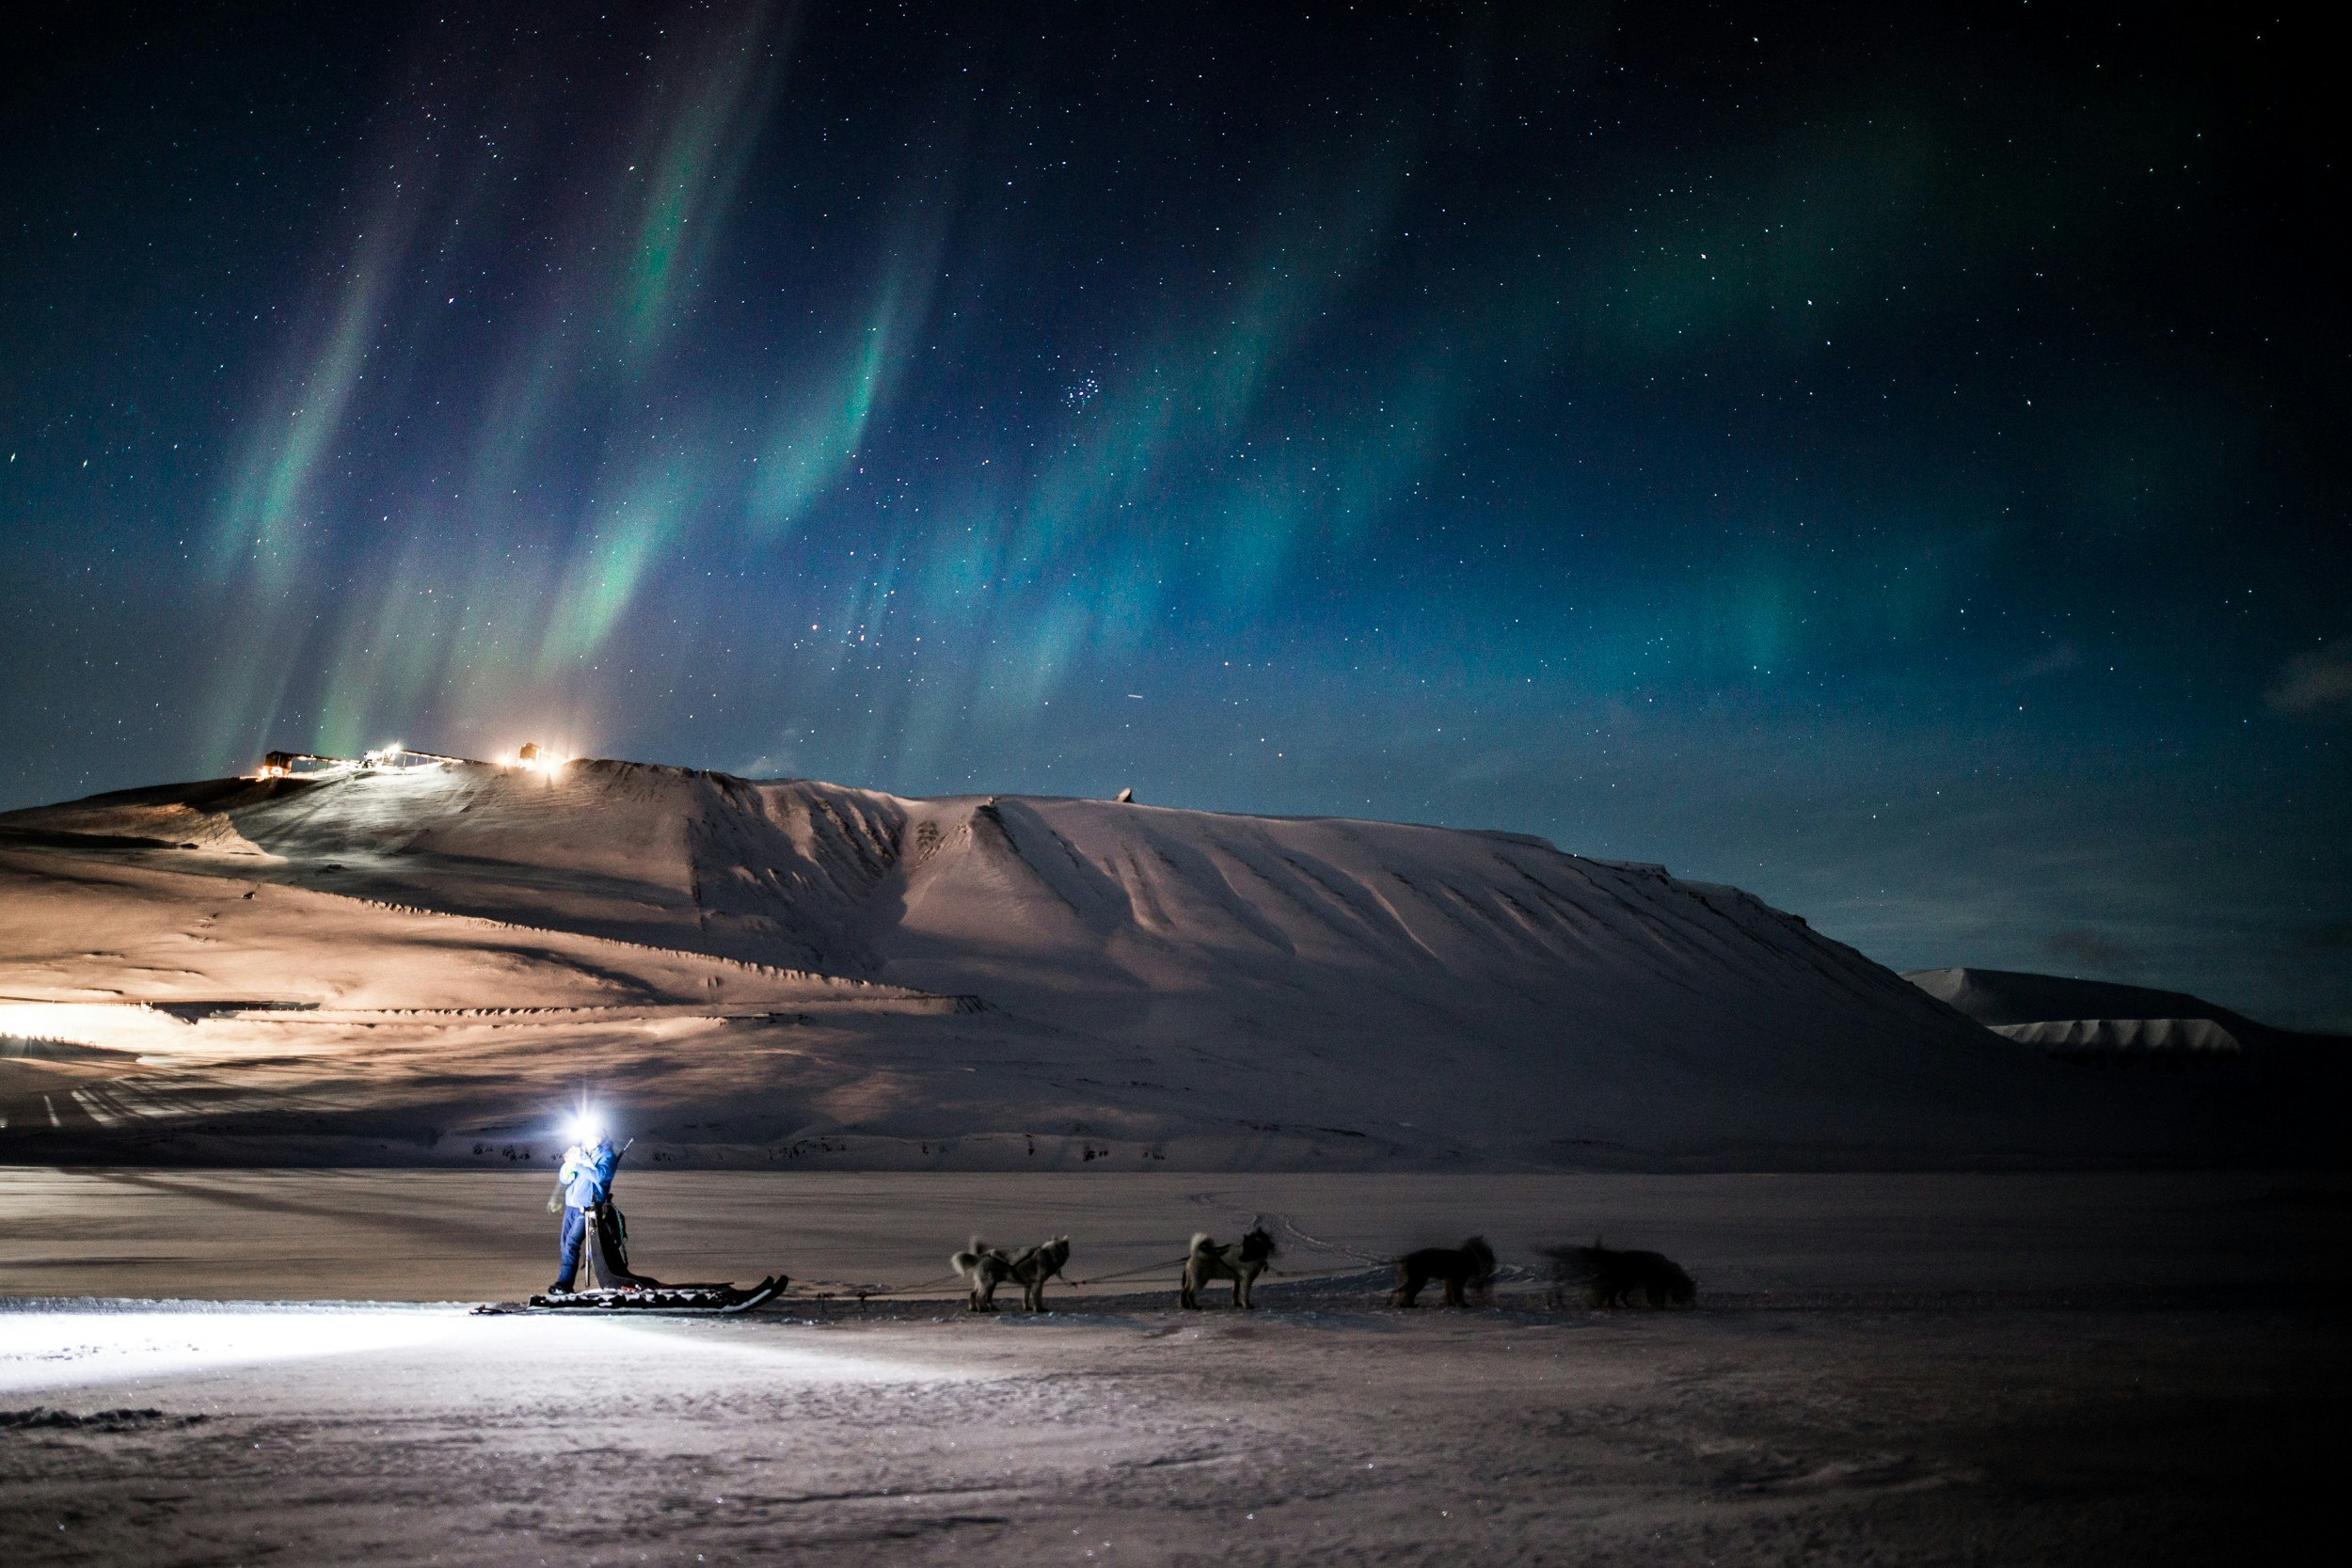 People dogsledding with the Northern Lights in the background